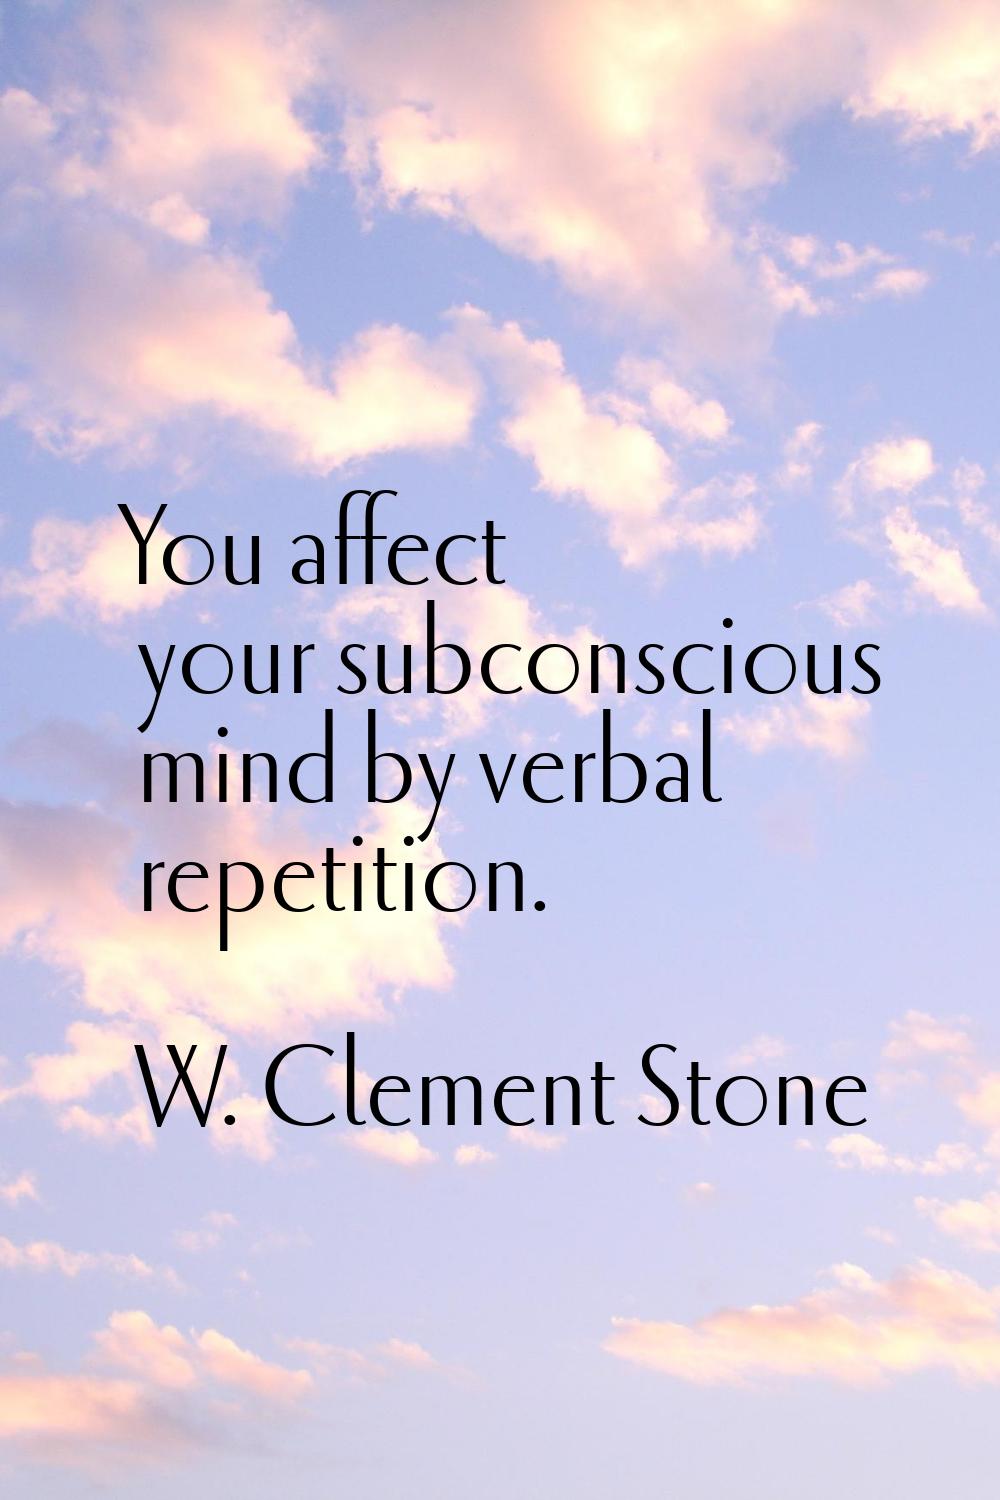 You affect your subconscious mind by verbal repetition.